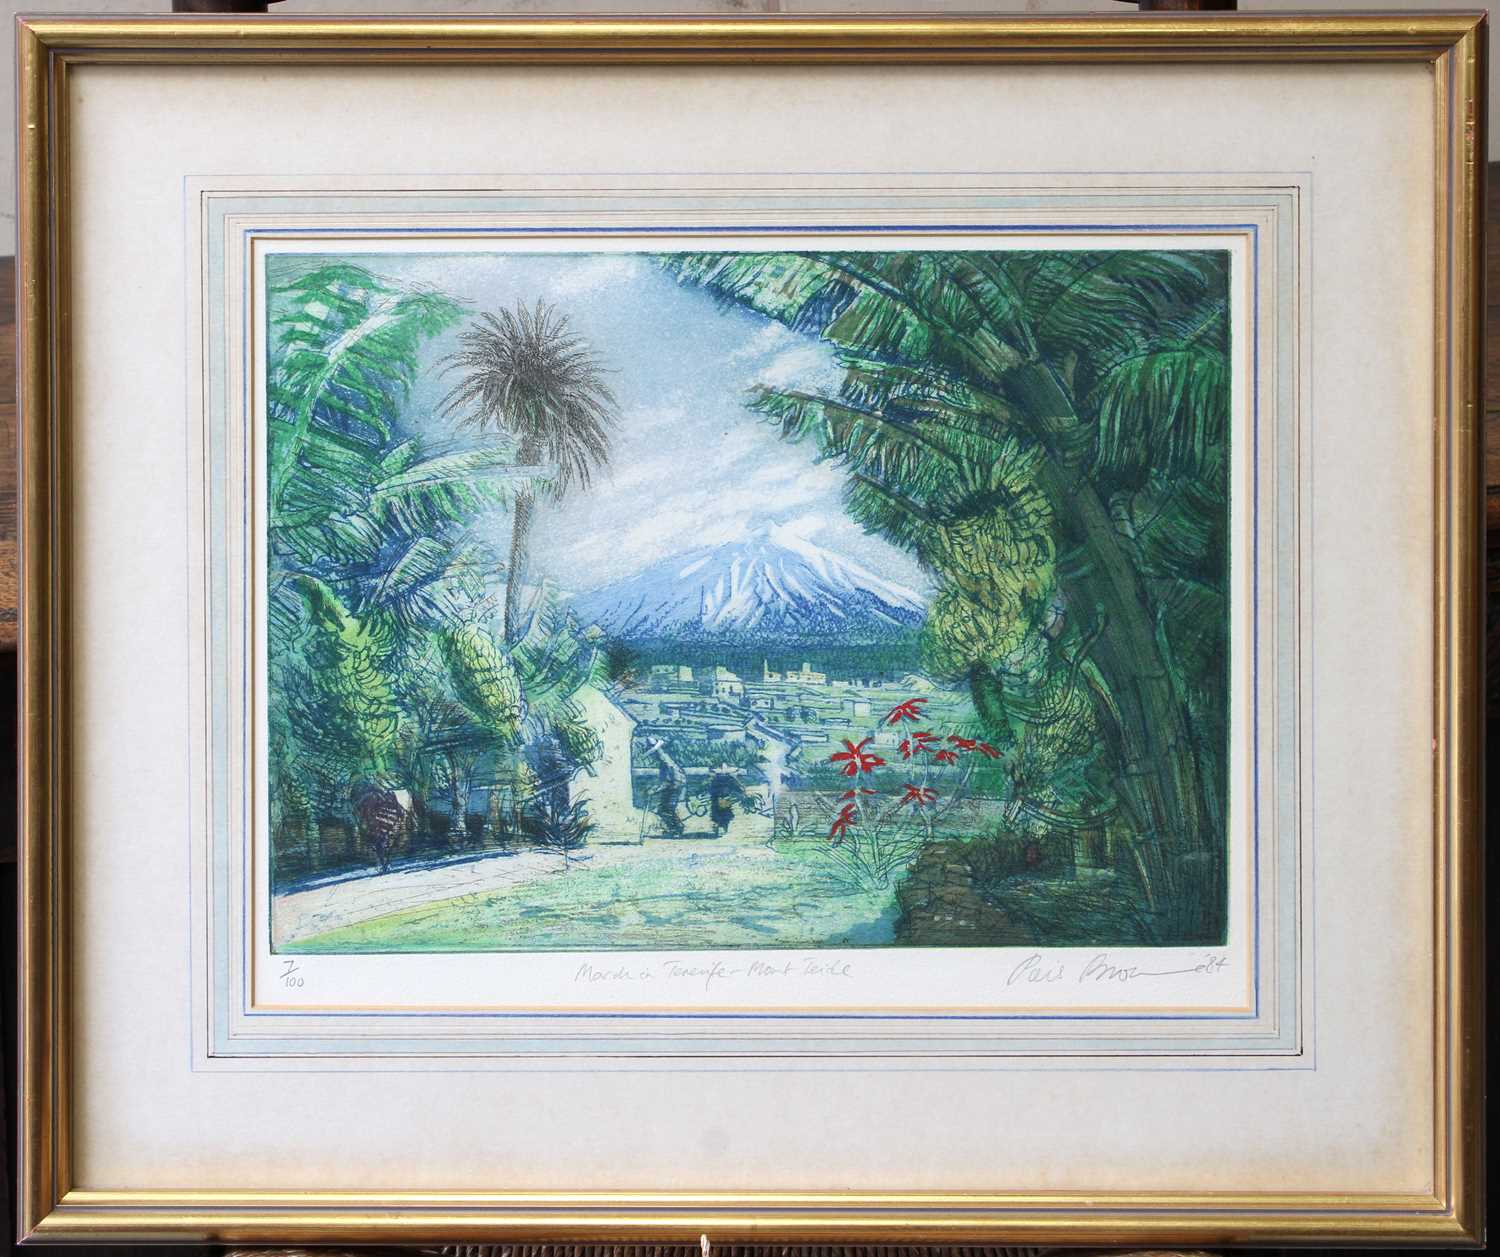 Piers Browne (b.1949) "March in Tenerife-Mount Teide" Signed, inscribed and dated (19)84, numbered - Image 3 of 4